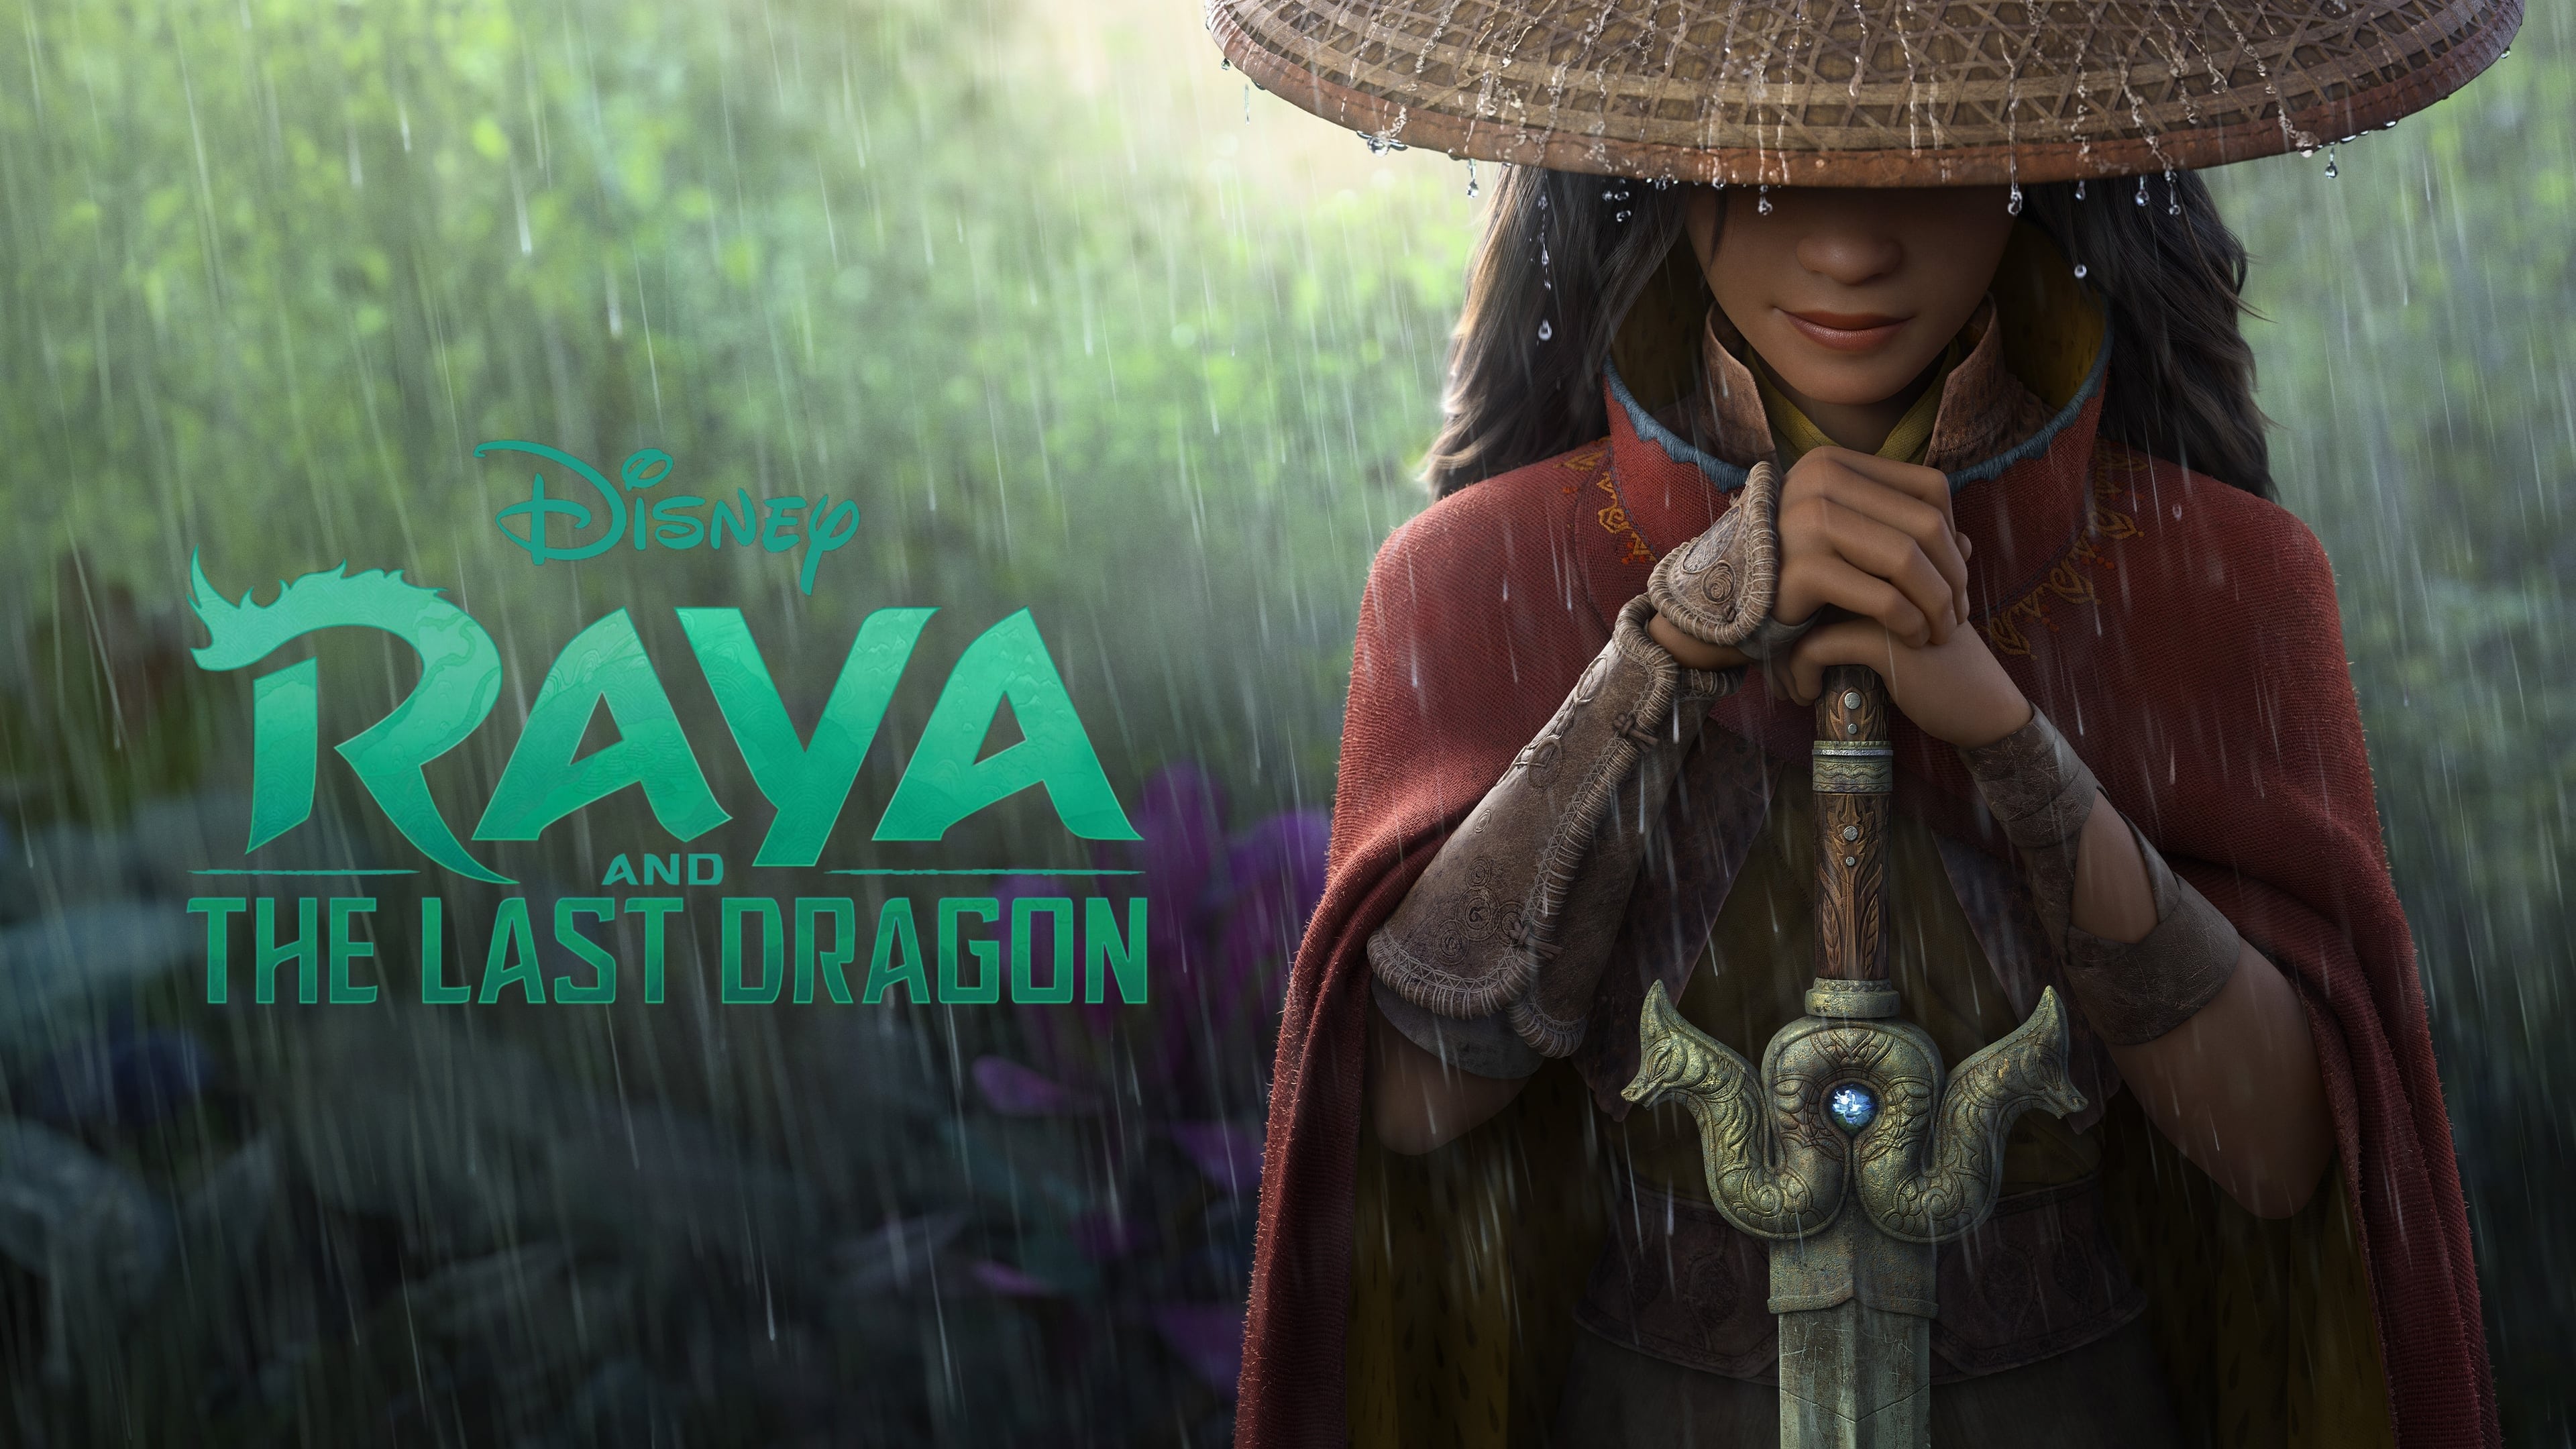 Raya and the Last Dragon (2021) English Full Movie Watch Online